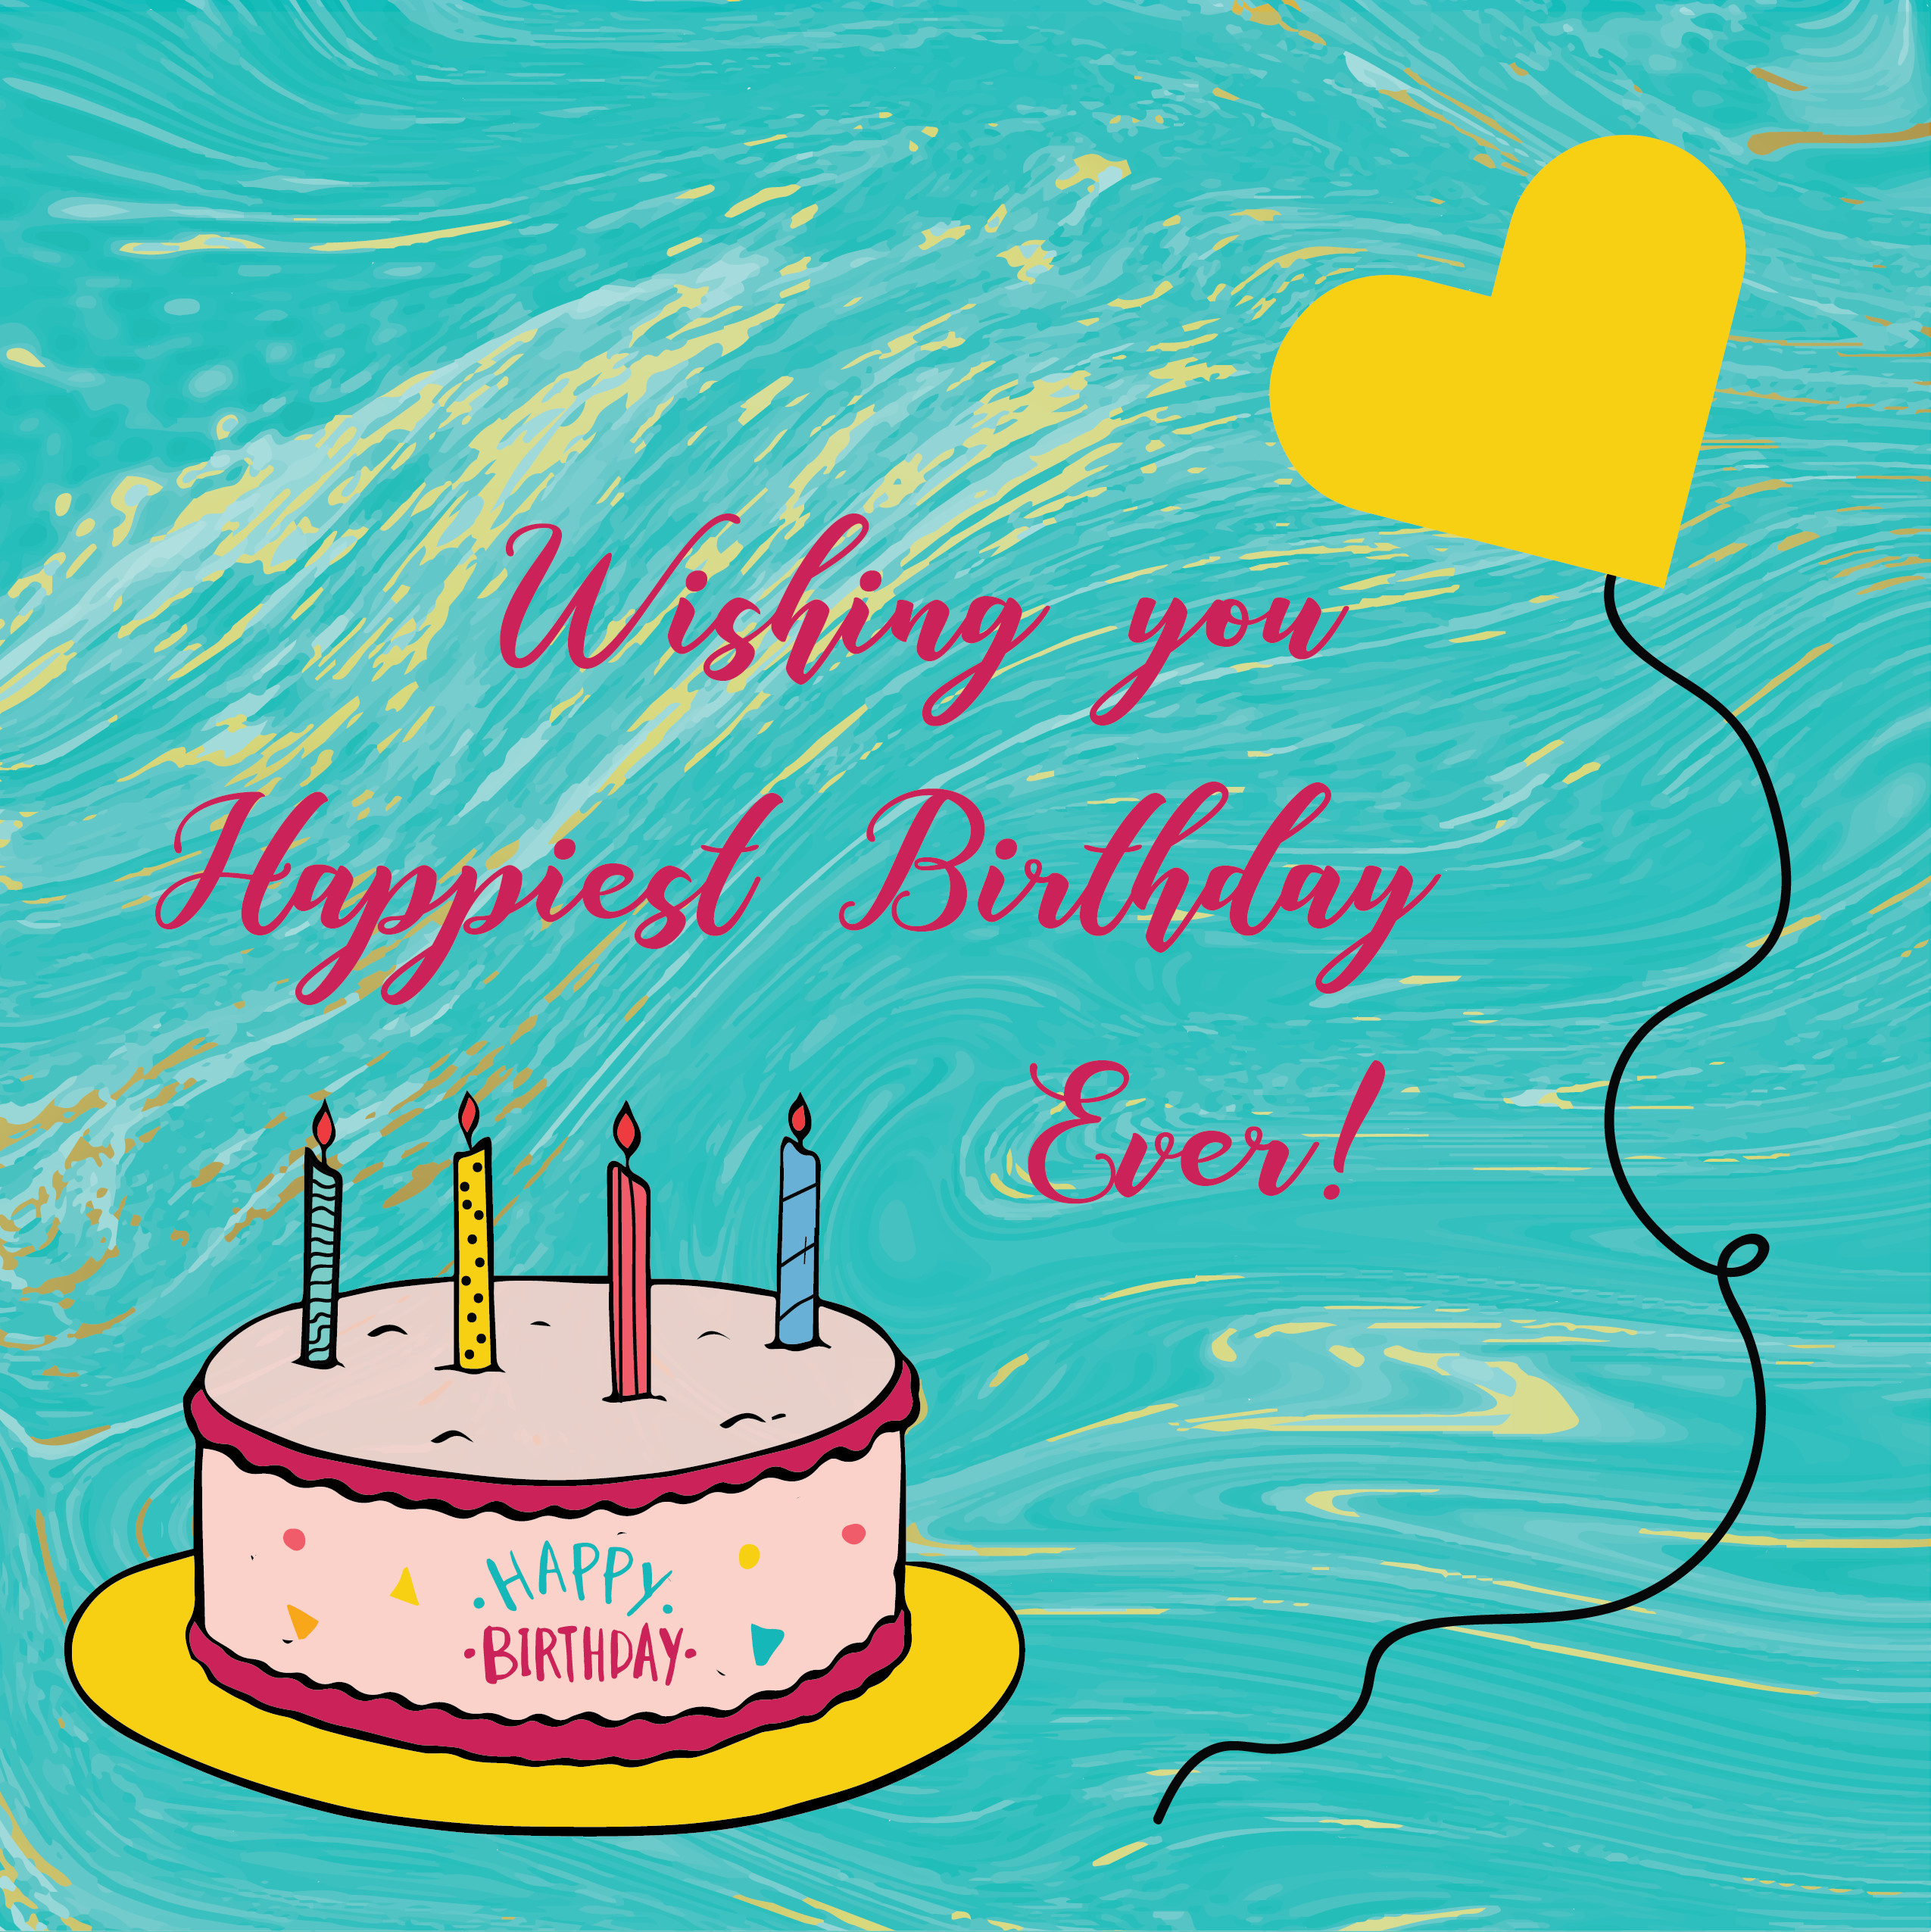 Birthday Wishes Picture
 200 Happy Birthday Wishes & Quotes with Funny & Cute